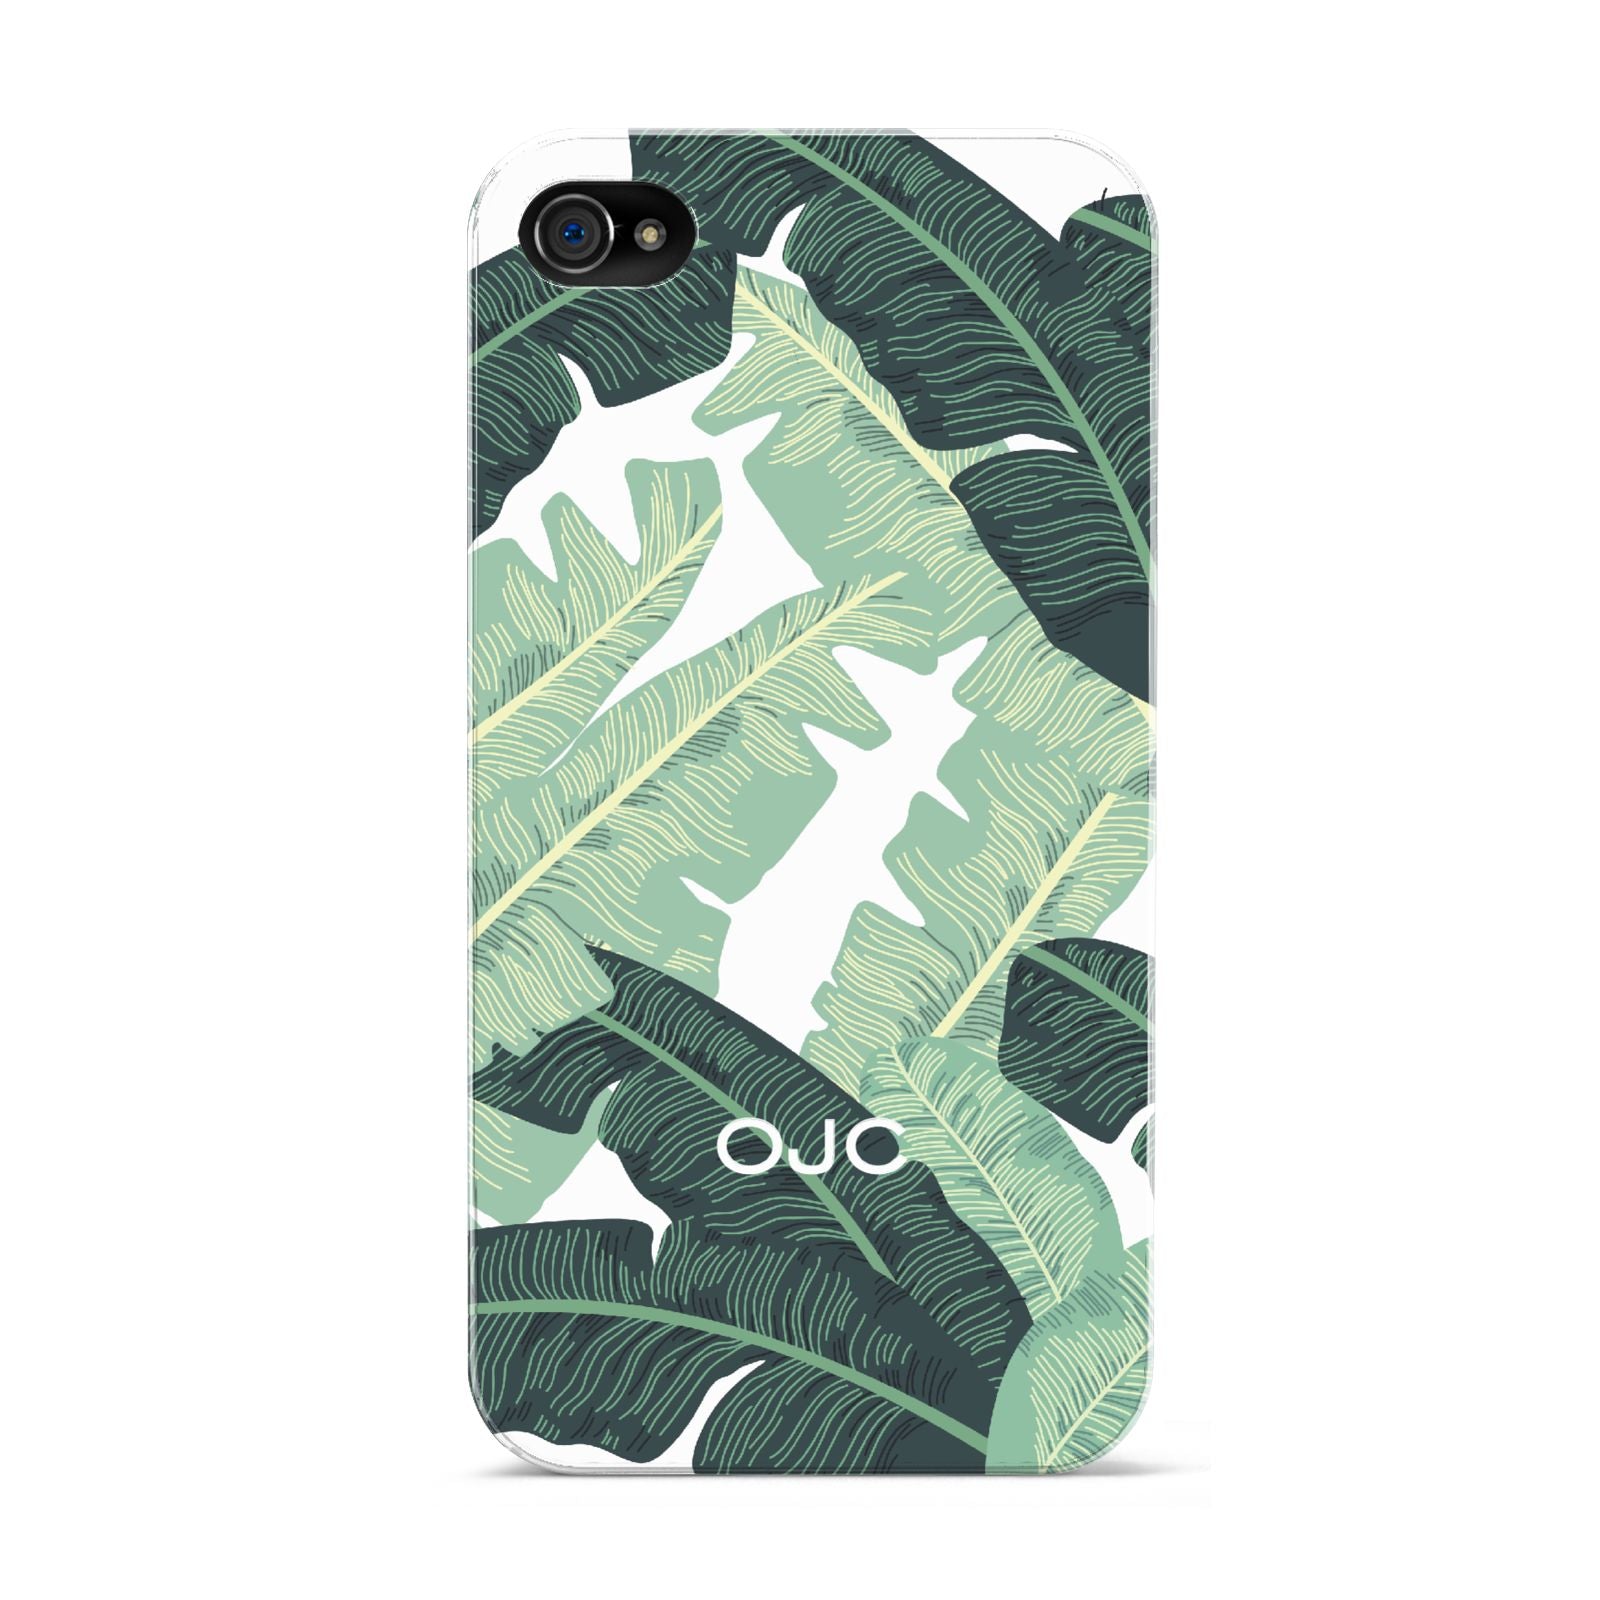 Personalised Banana Leaves Apple iPhone 4s Case